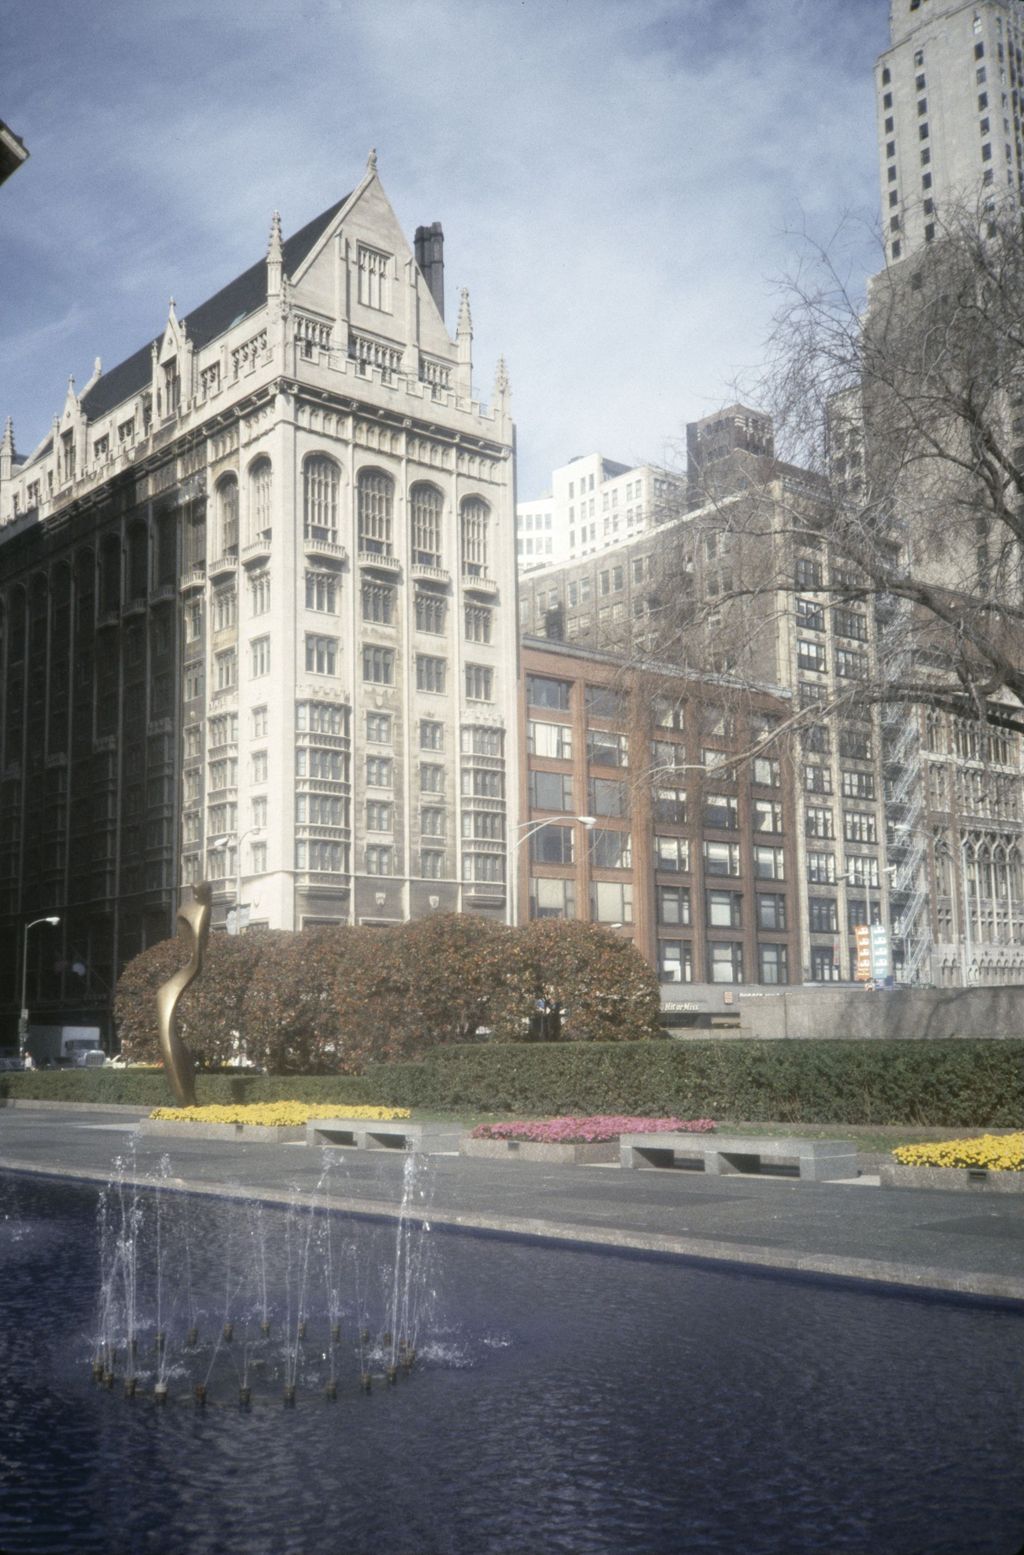 University Club of Chicago and Gage Group buildings